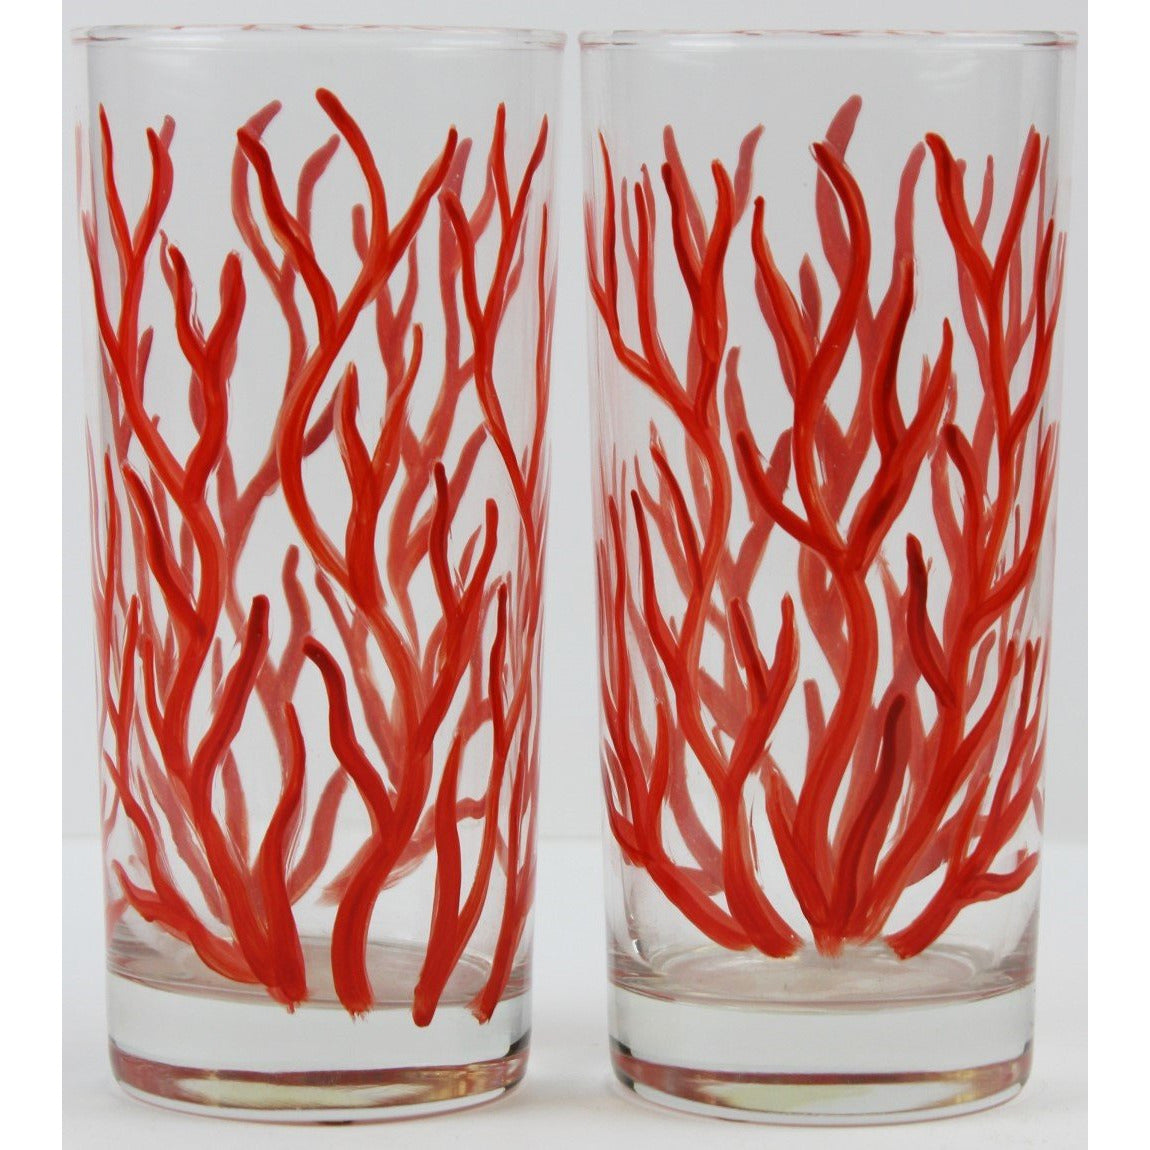 "Pair x Hand-Painted Coral Highball Glasses" (SOLD)